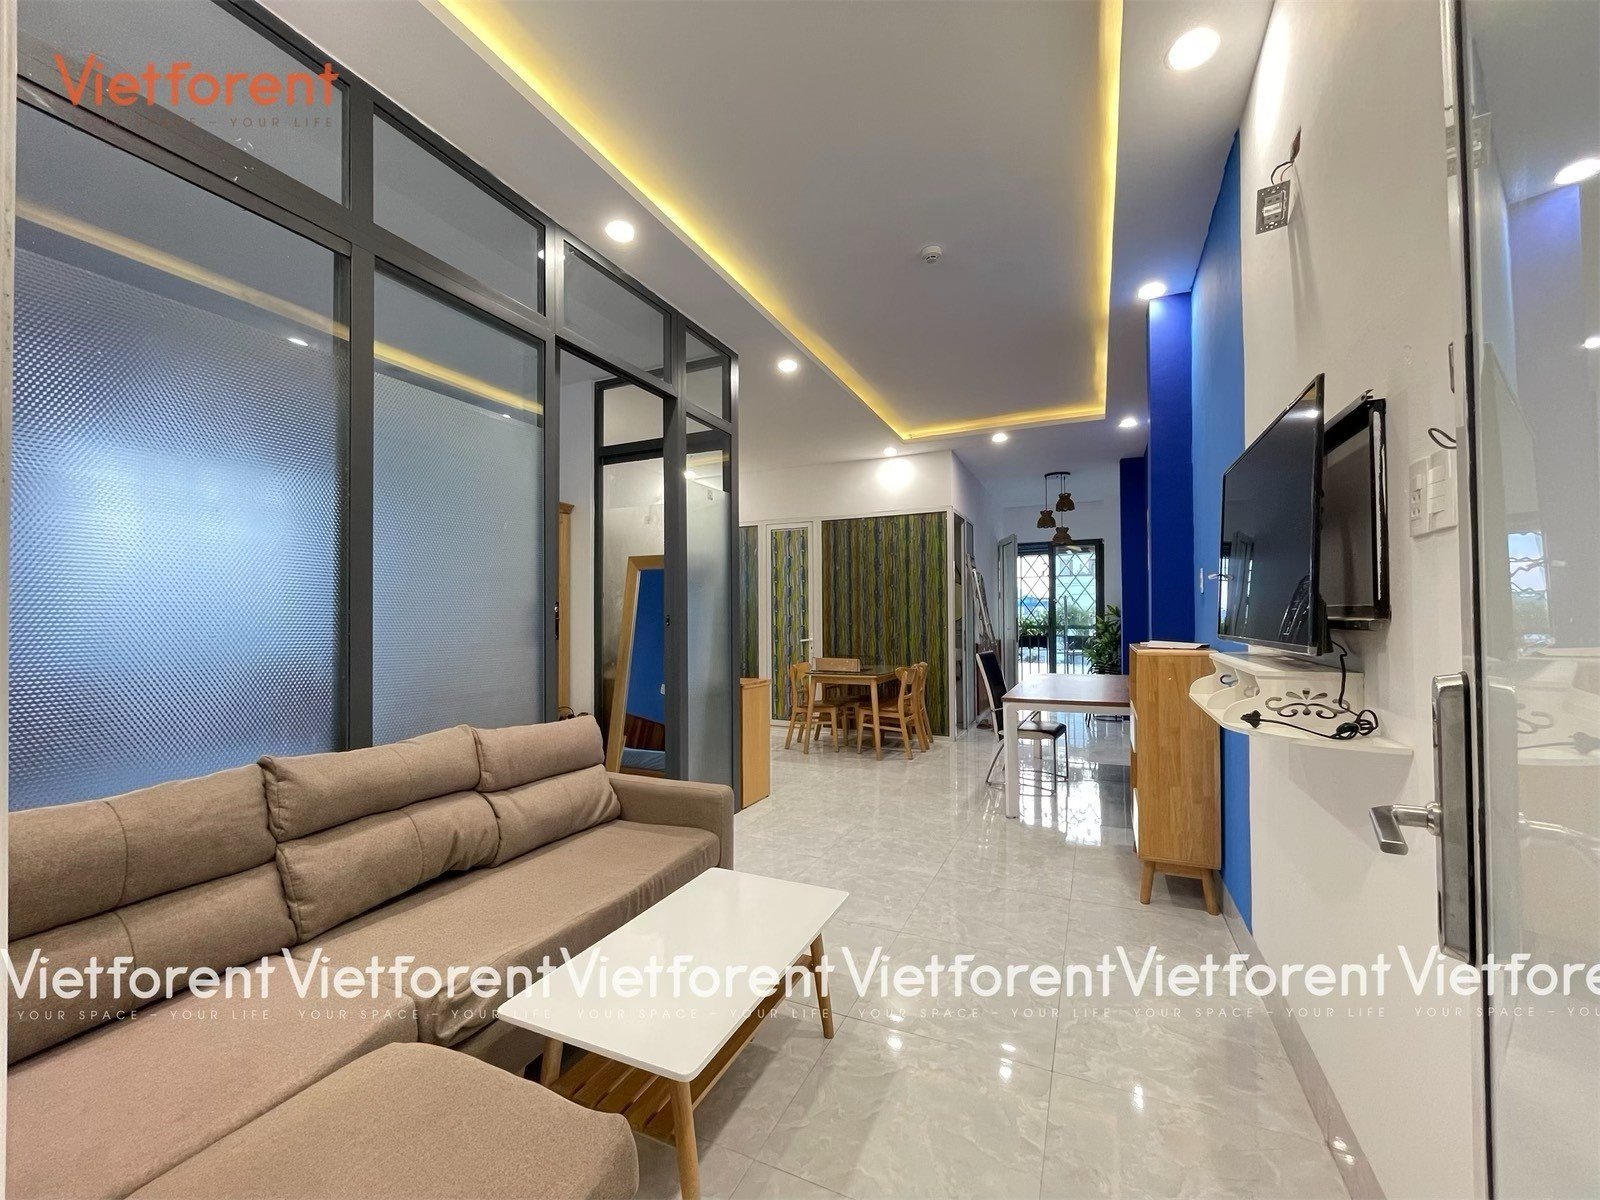 Cool apartment with 2 bedrooms for rent in An Thuong area, Da Nang,A560N.1 